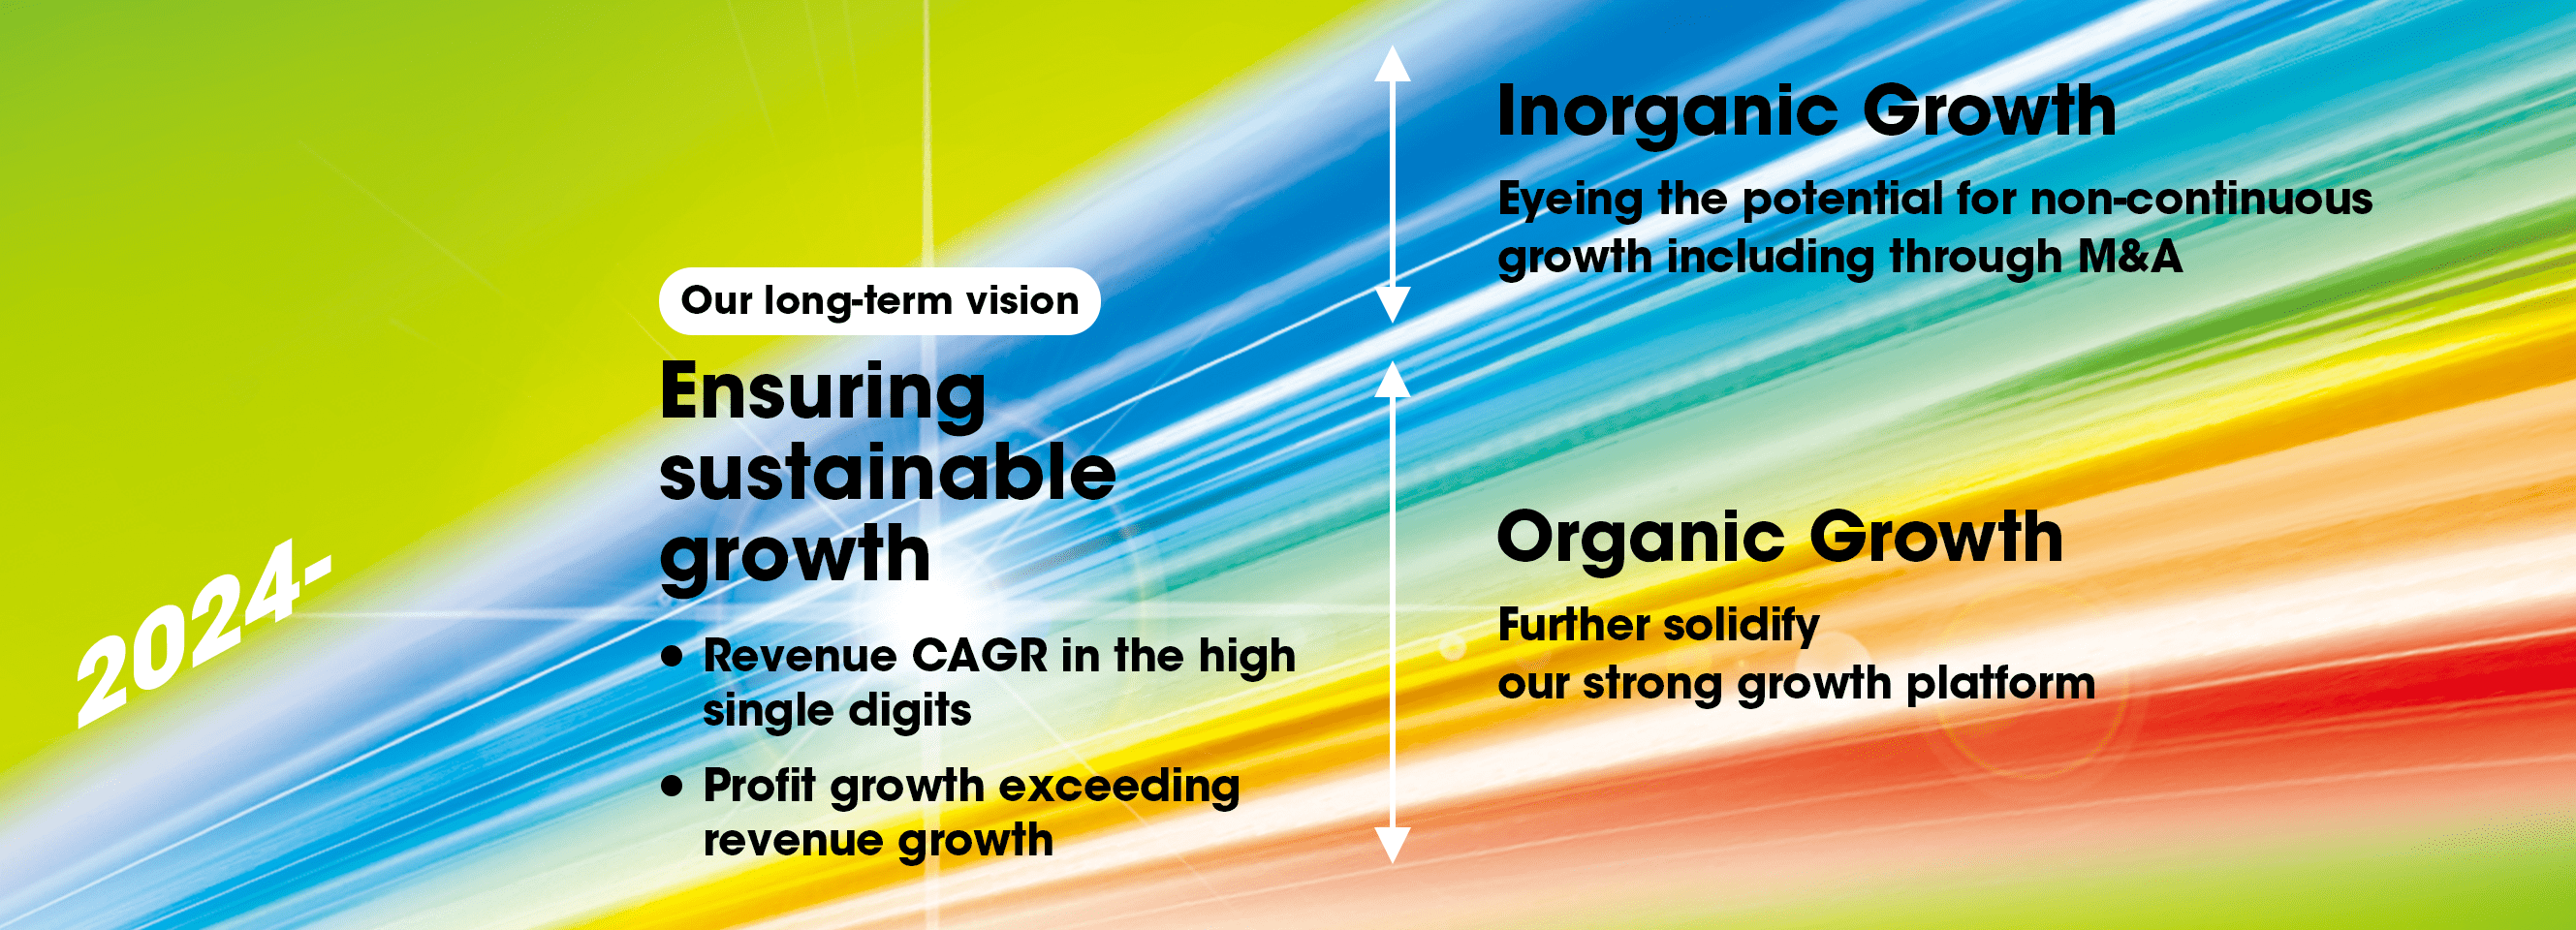 Our long-term vision